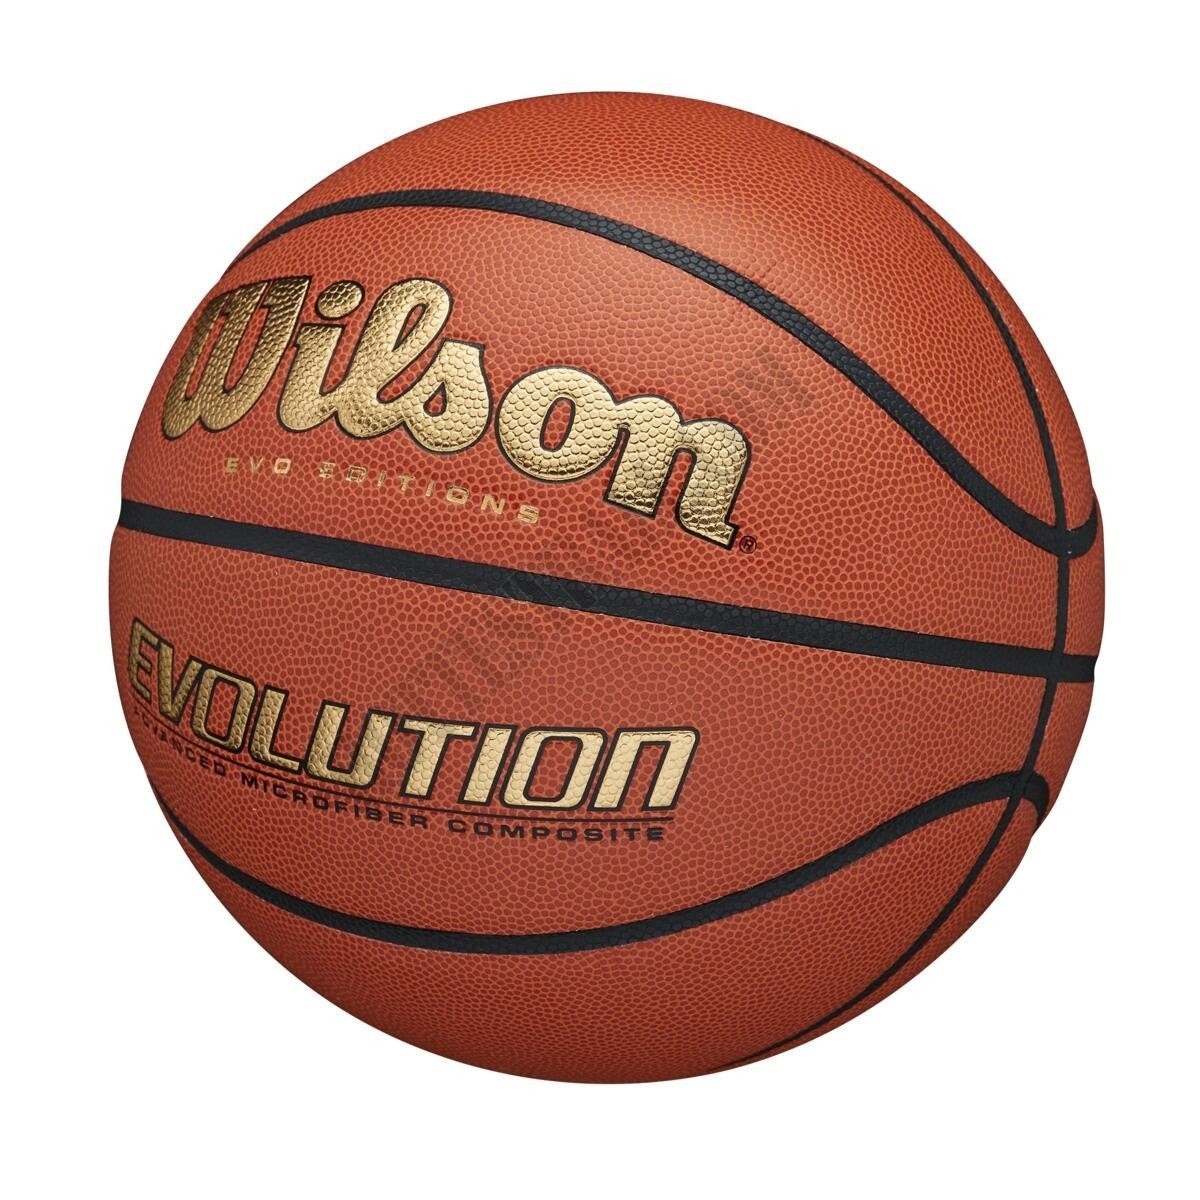 Evo Editions Gold Basketball - Wilson Discount Store - -4